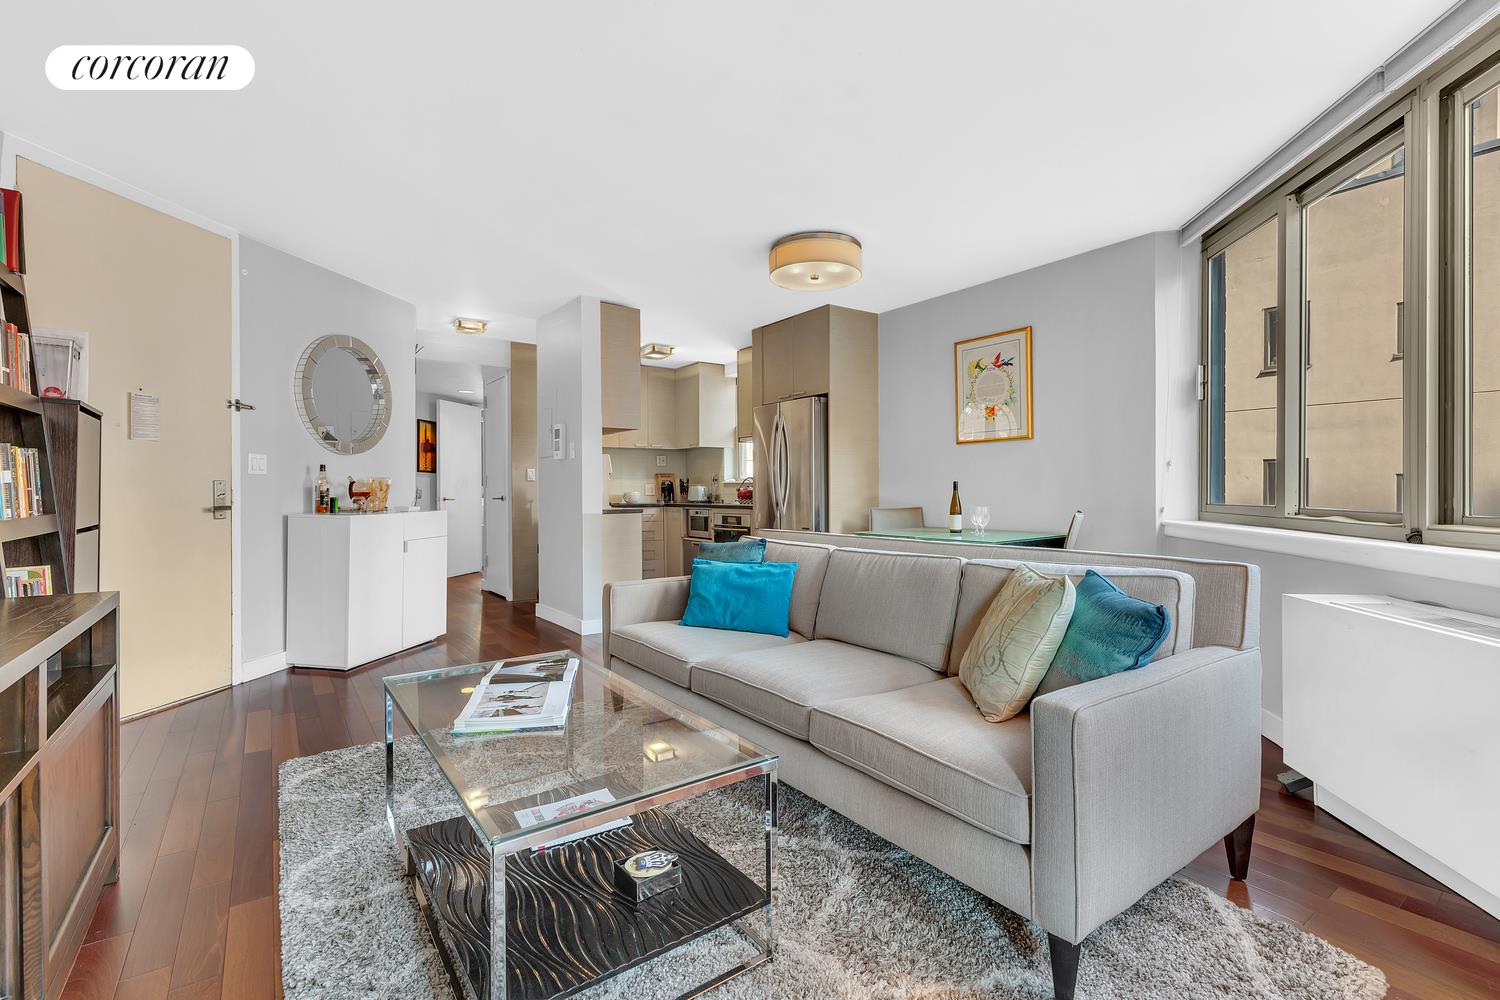 206 East 95th Street 9B, Yorkville, Upper East Side, NYC - 1 Bedrooms  
1 Bathrooms  
3 Rooms - 